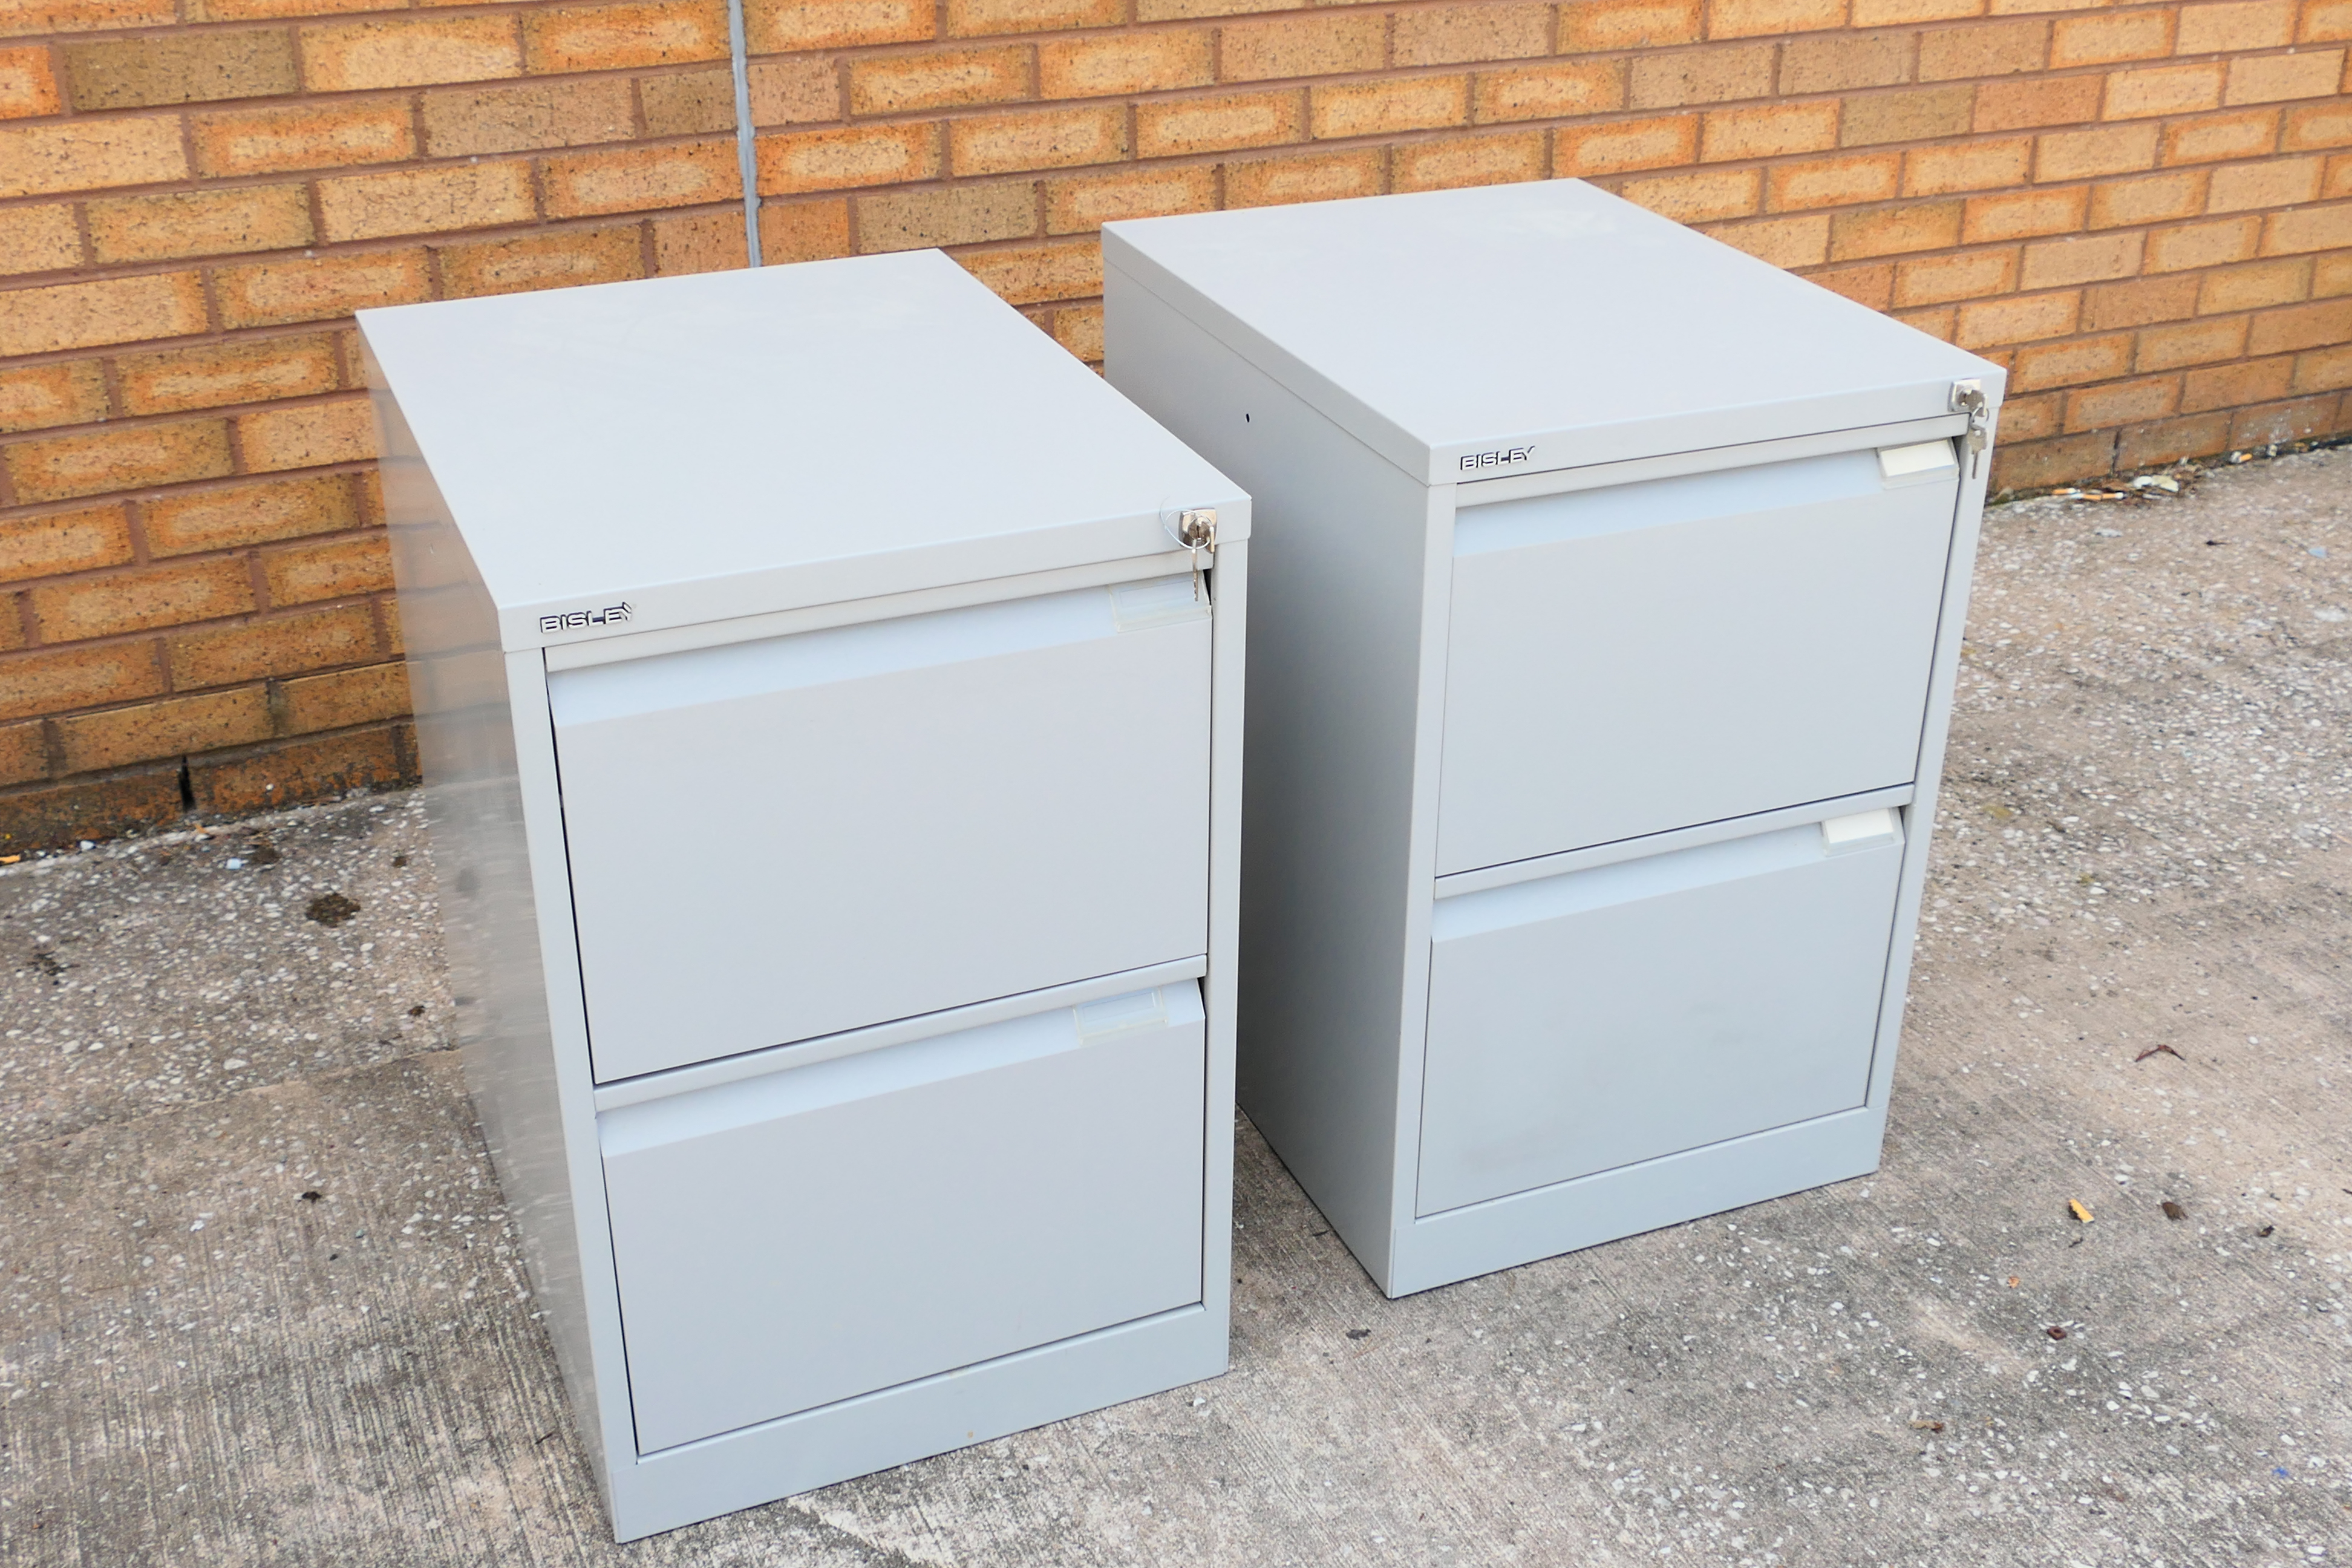 Two metal filing cabinets measuring 71 cm x 47 cm x 62 cm. - Image 3 of 3